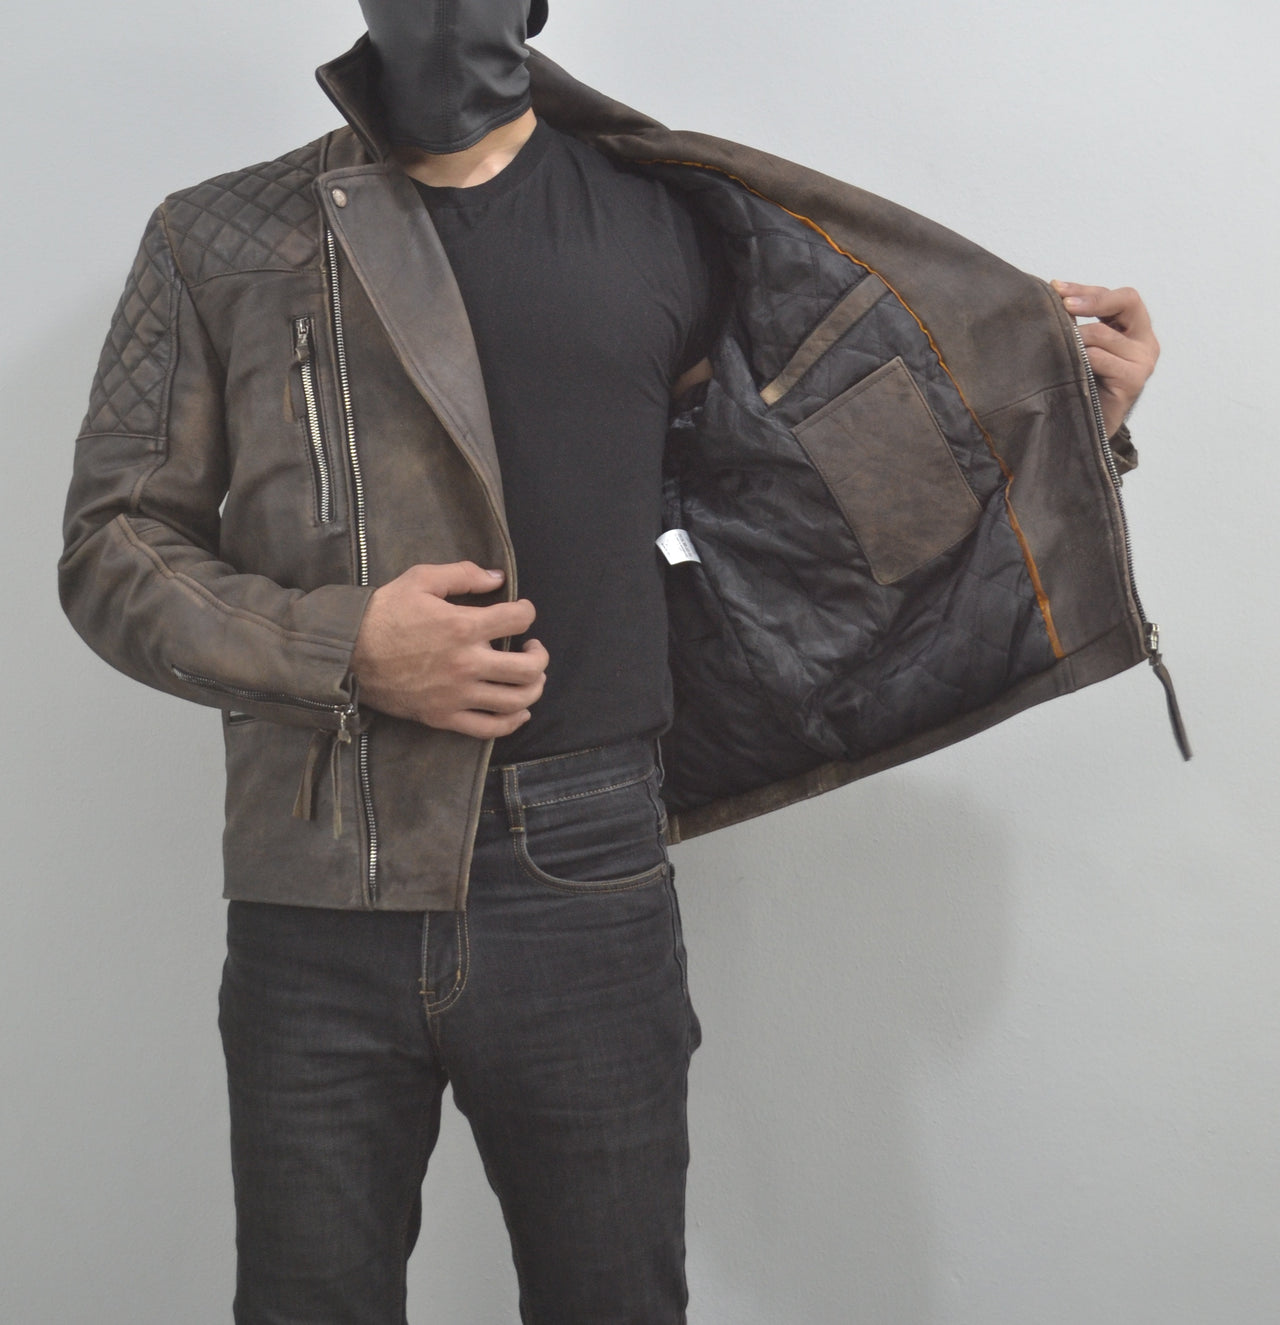 Motorcycle Distressed Natural Rugged Biker Leather Jacket